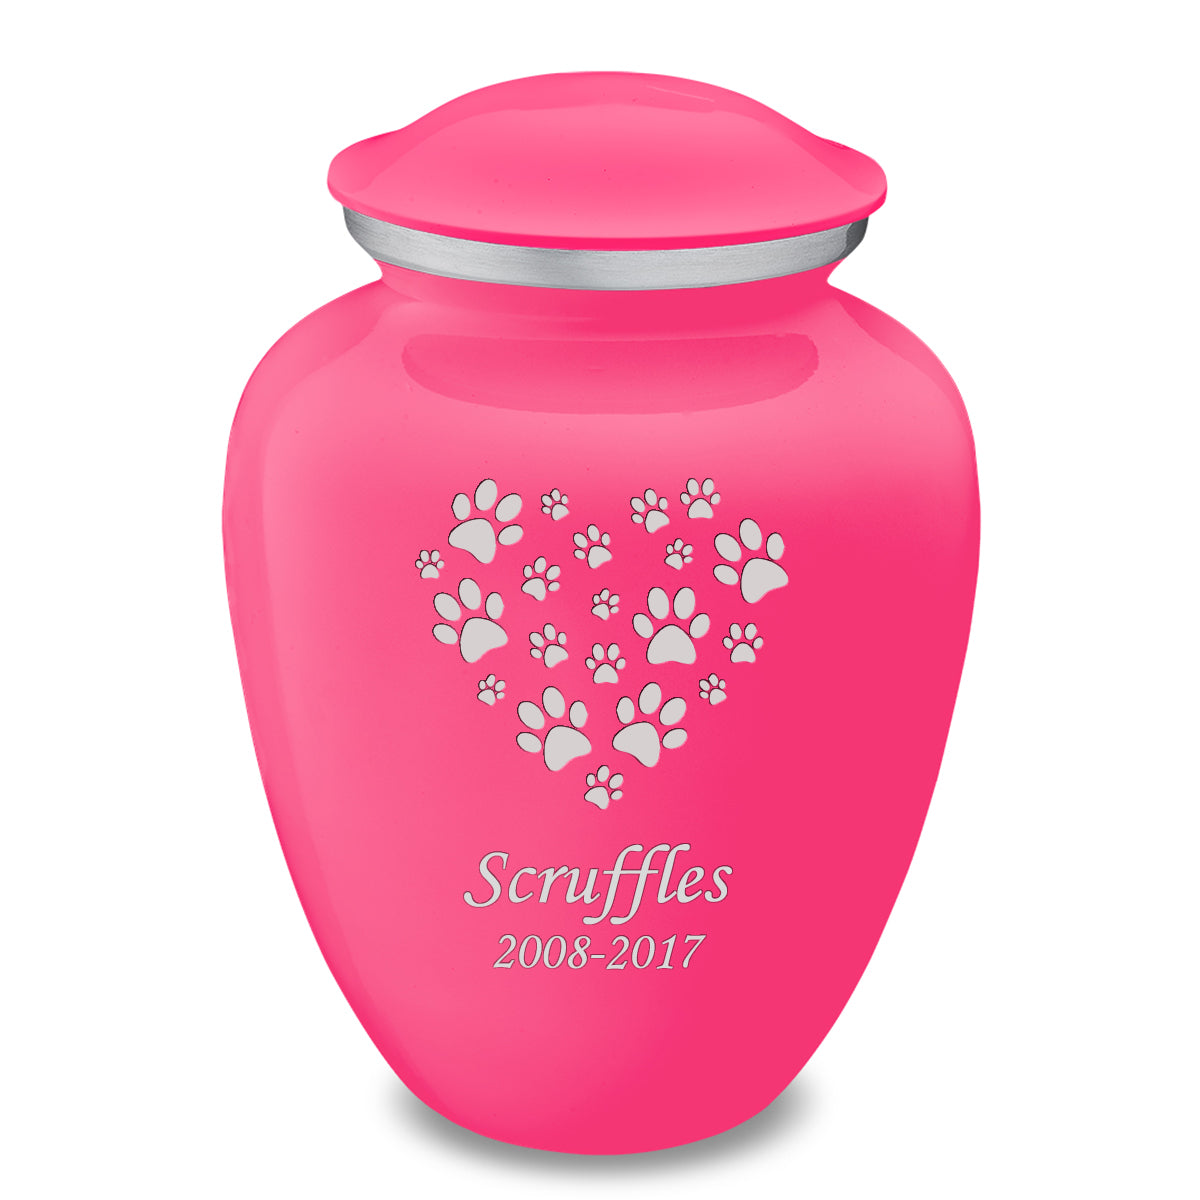 Large Embrace Bright Pink Heart Paws Pet Cremation Urn